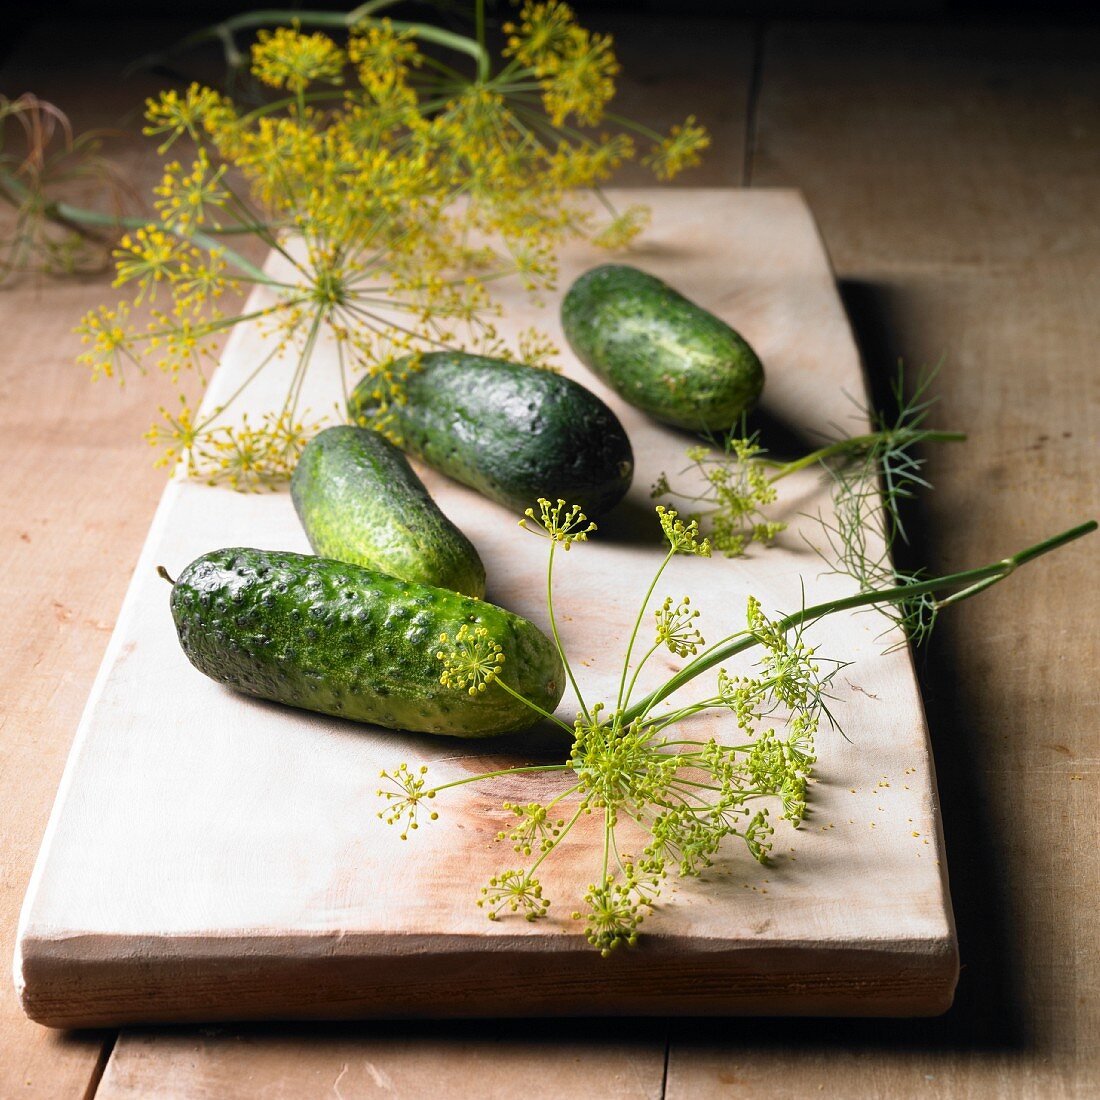 Gherkins and dill flowers on a wooden board